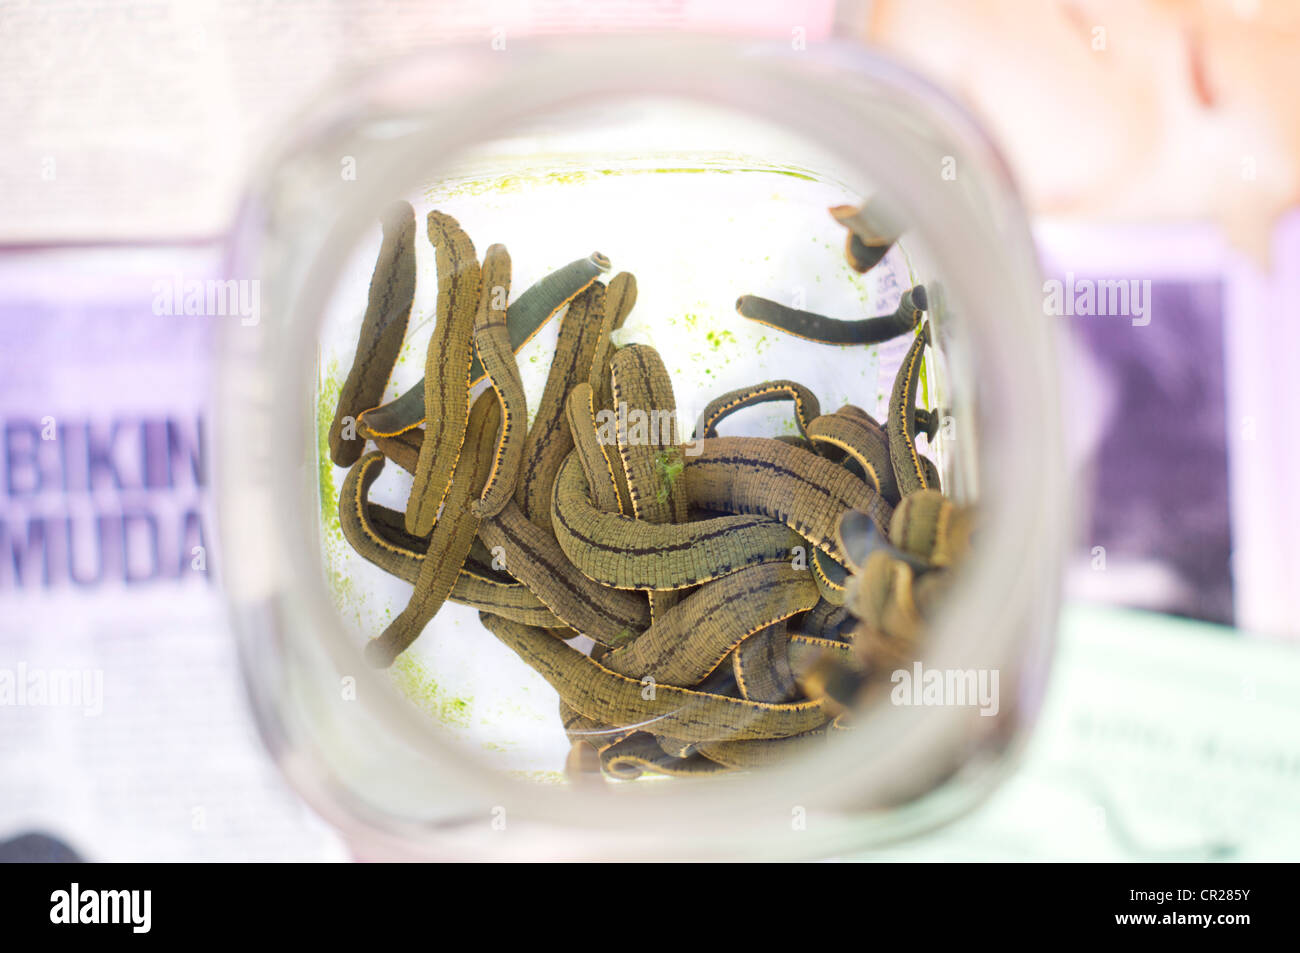 Medicinal leeches are for sale in jar, it is used as alternate